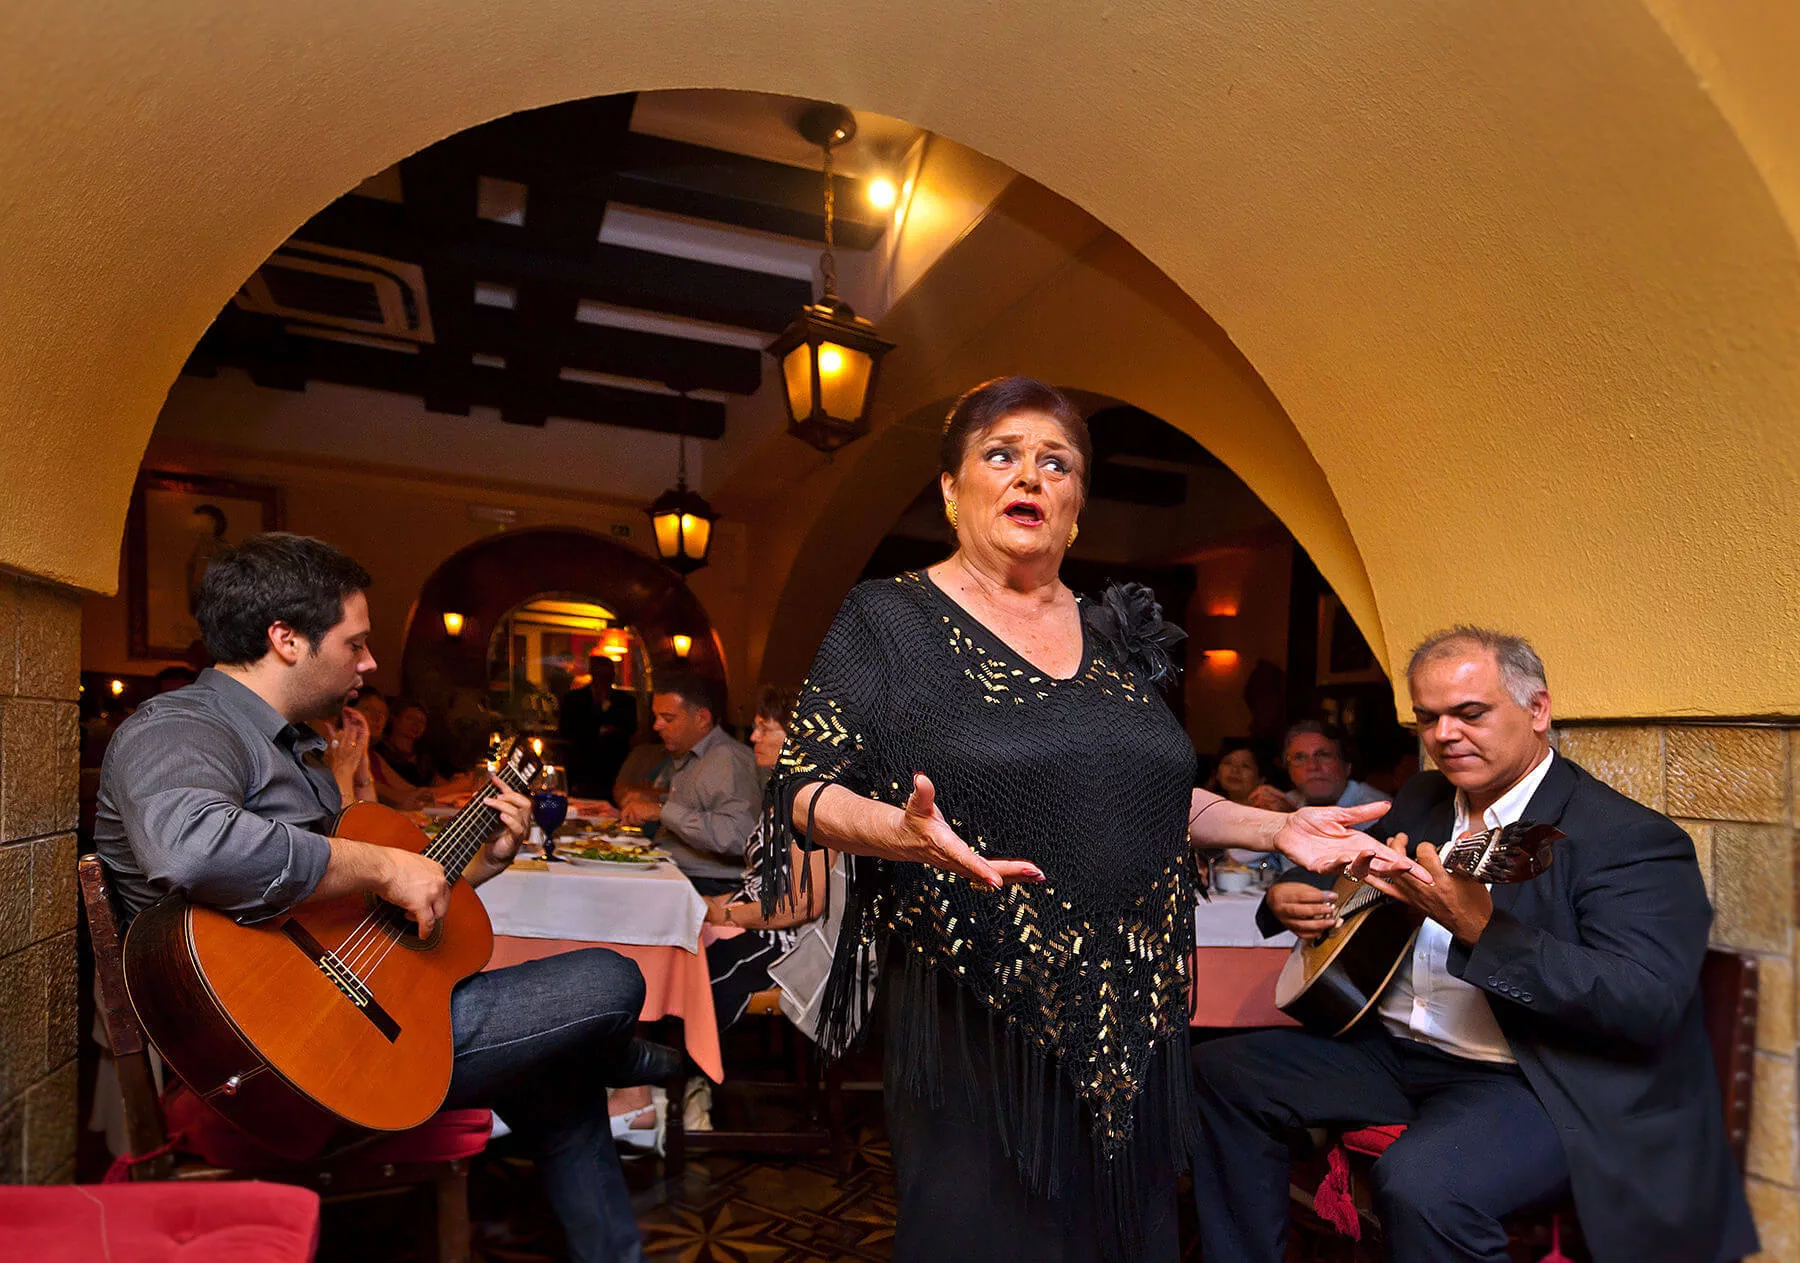 Convivial, rustic bars are the best venues to enjoy a night of fado